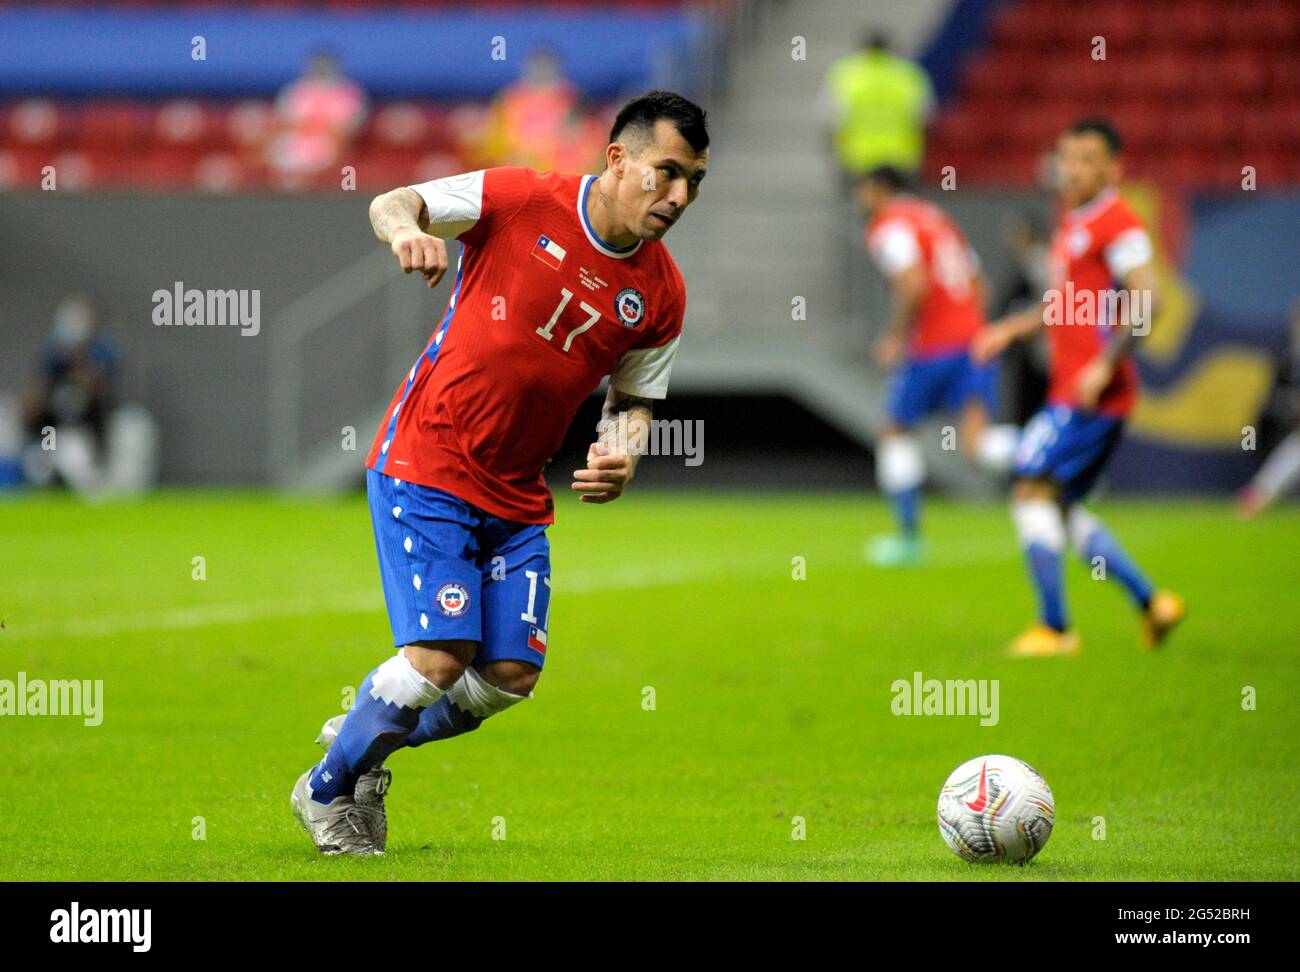 BRASILIA, BRAZIL - JUNE 24: Gary Medel of Chile on action ,during the match between Chile and Paraguay as part of Conmebol Copa America Brazil 2021 at Mane Garrincha Stadium on June 24, 2021 in Brasilia, Brazil. (MB Media) Stock Photo